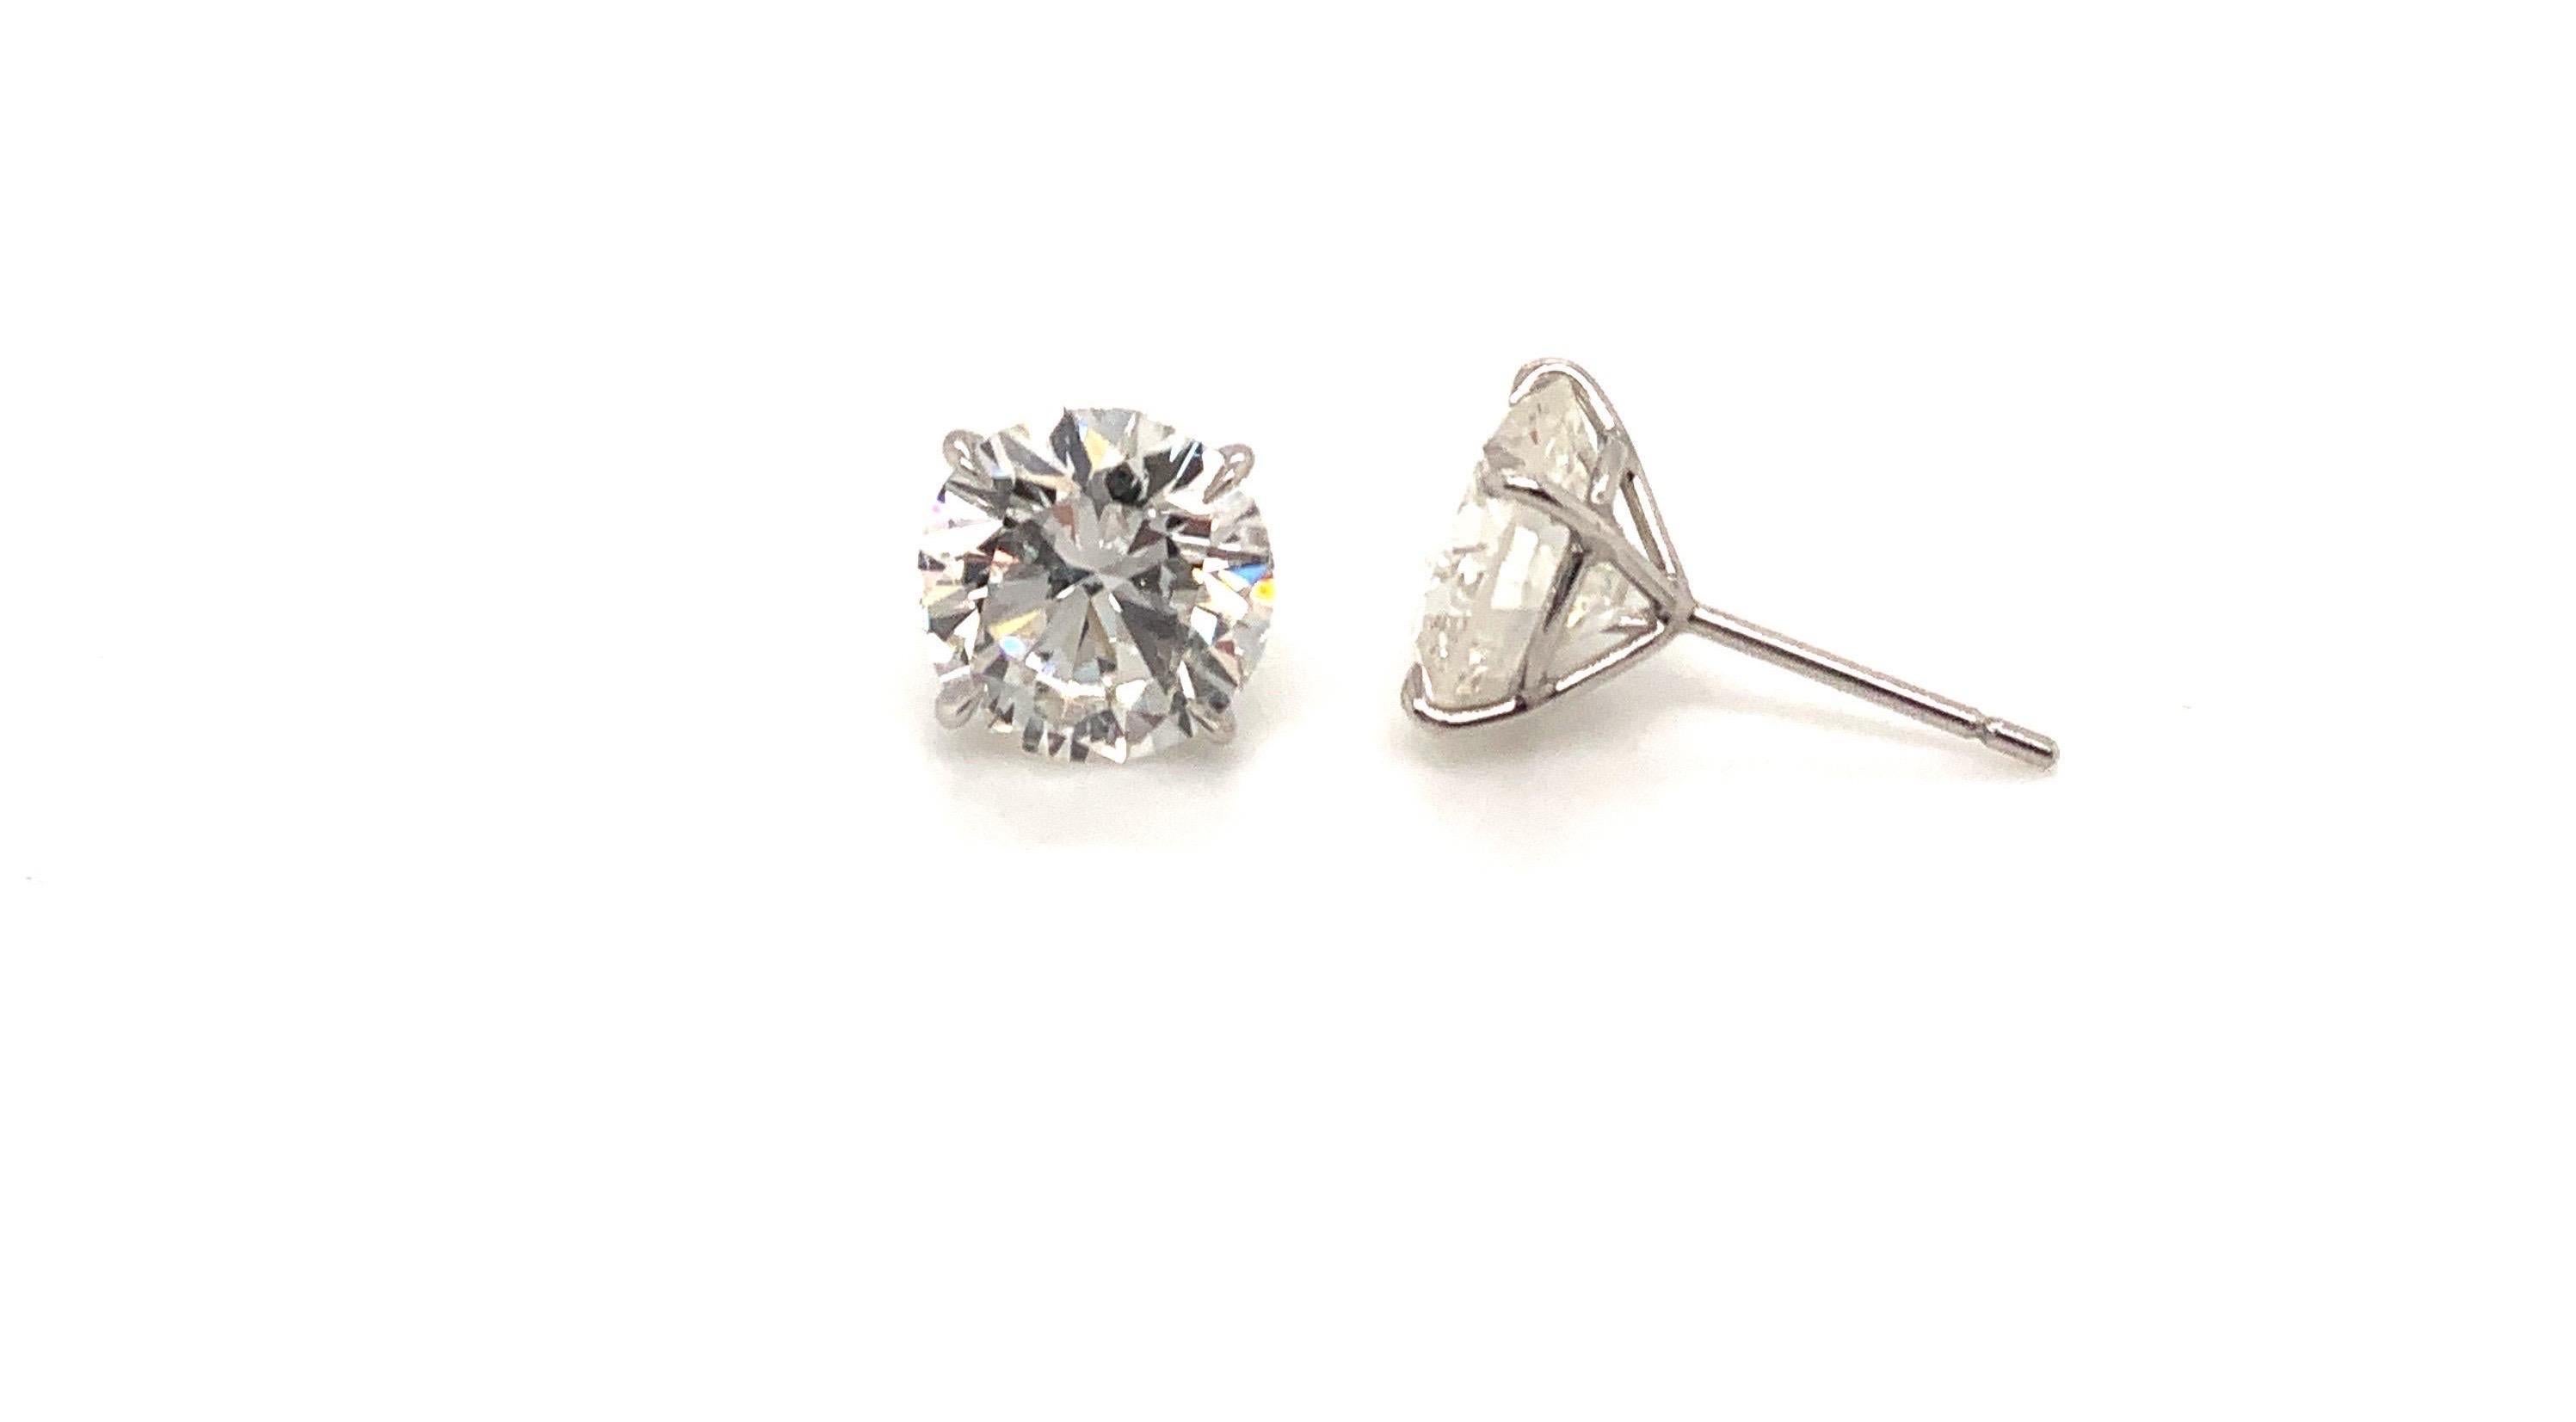 Stunning pair of GIA Certified Round brilliant cut Diamond Stud Earrings
Set in hand made platinum on a four prong mounting. The Diamonds in these earrings we’re carefully selected to create the perfect match for these timeless earrings
6.21 total